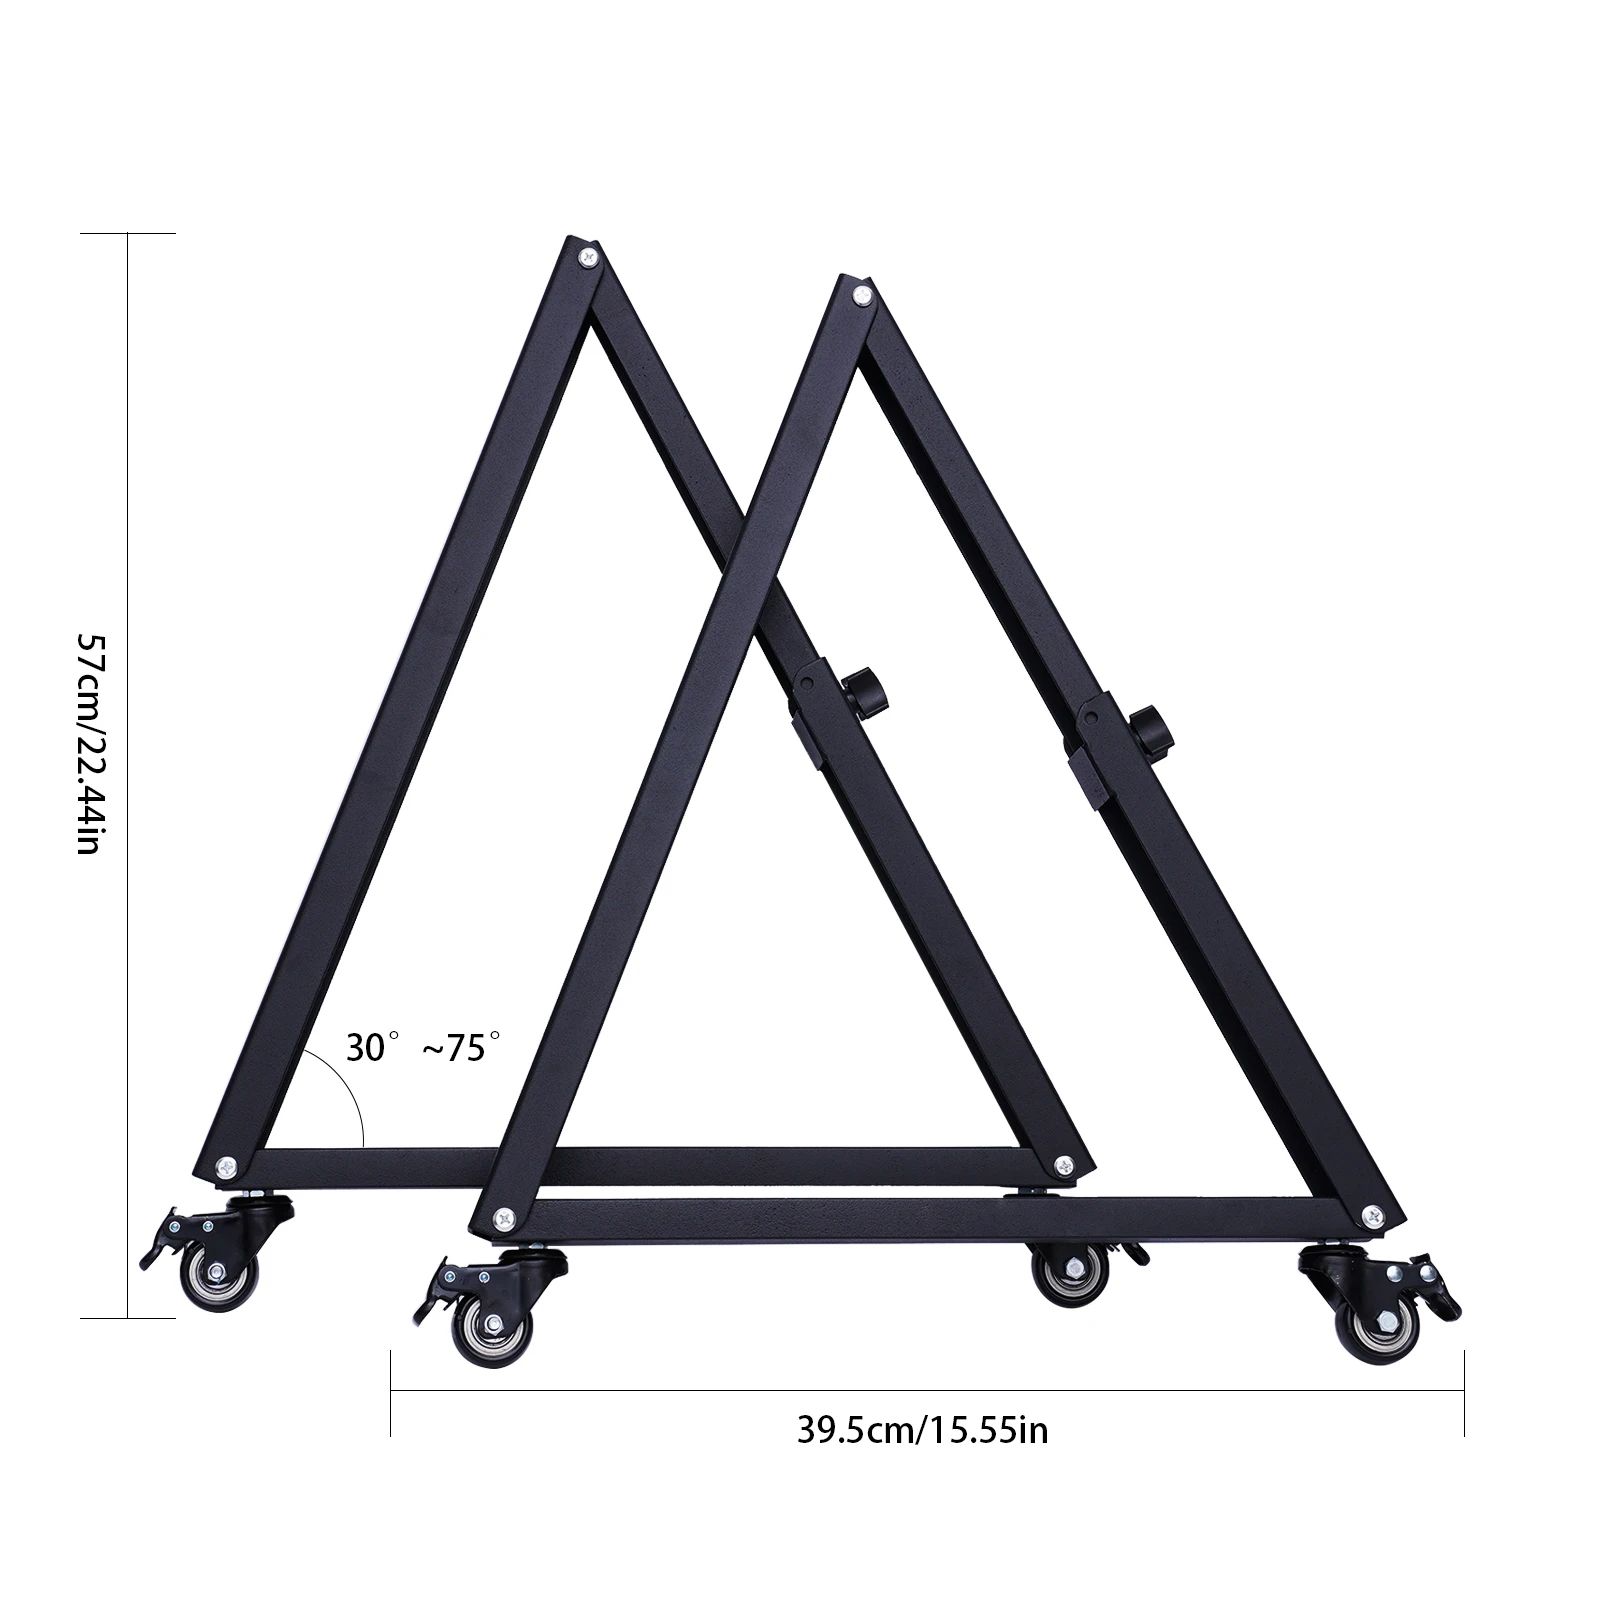 19 55In 30° 75° Low Height Adjustable Mobile Tv Stand Monitor Floor Stand  Mount Universal Flat Screen Rolling Tv Cart W/Wheels For Foldable Portable Adjustable Tv Stands (View 8 of 15)